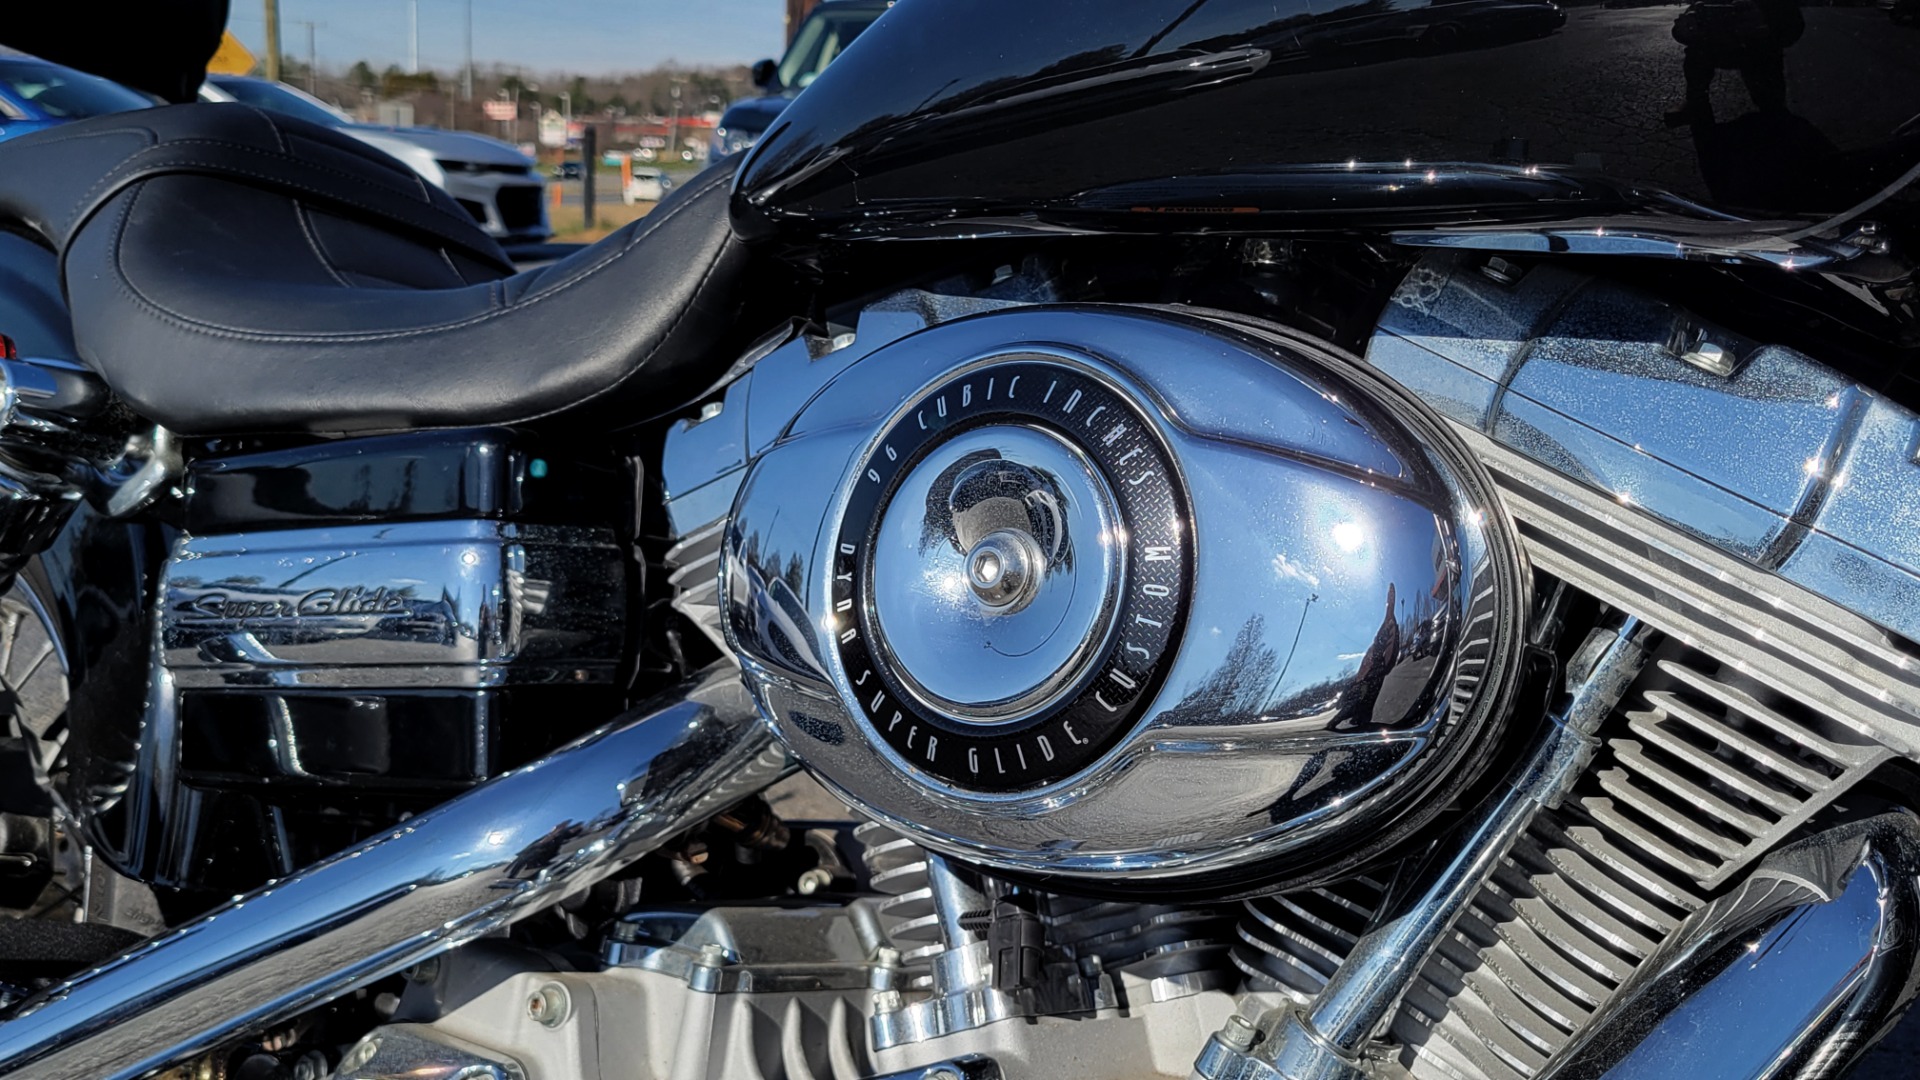 Used 2007 Harley Davidson SUPER GLIDE 1600CC / DYNA GLIDE / LOTS OF CHROME / ONLY 45 MILES for sale Sold at Formula Imports in Charlotte NC 28227 18